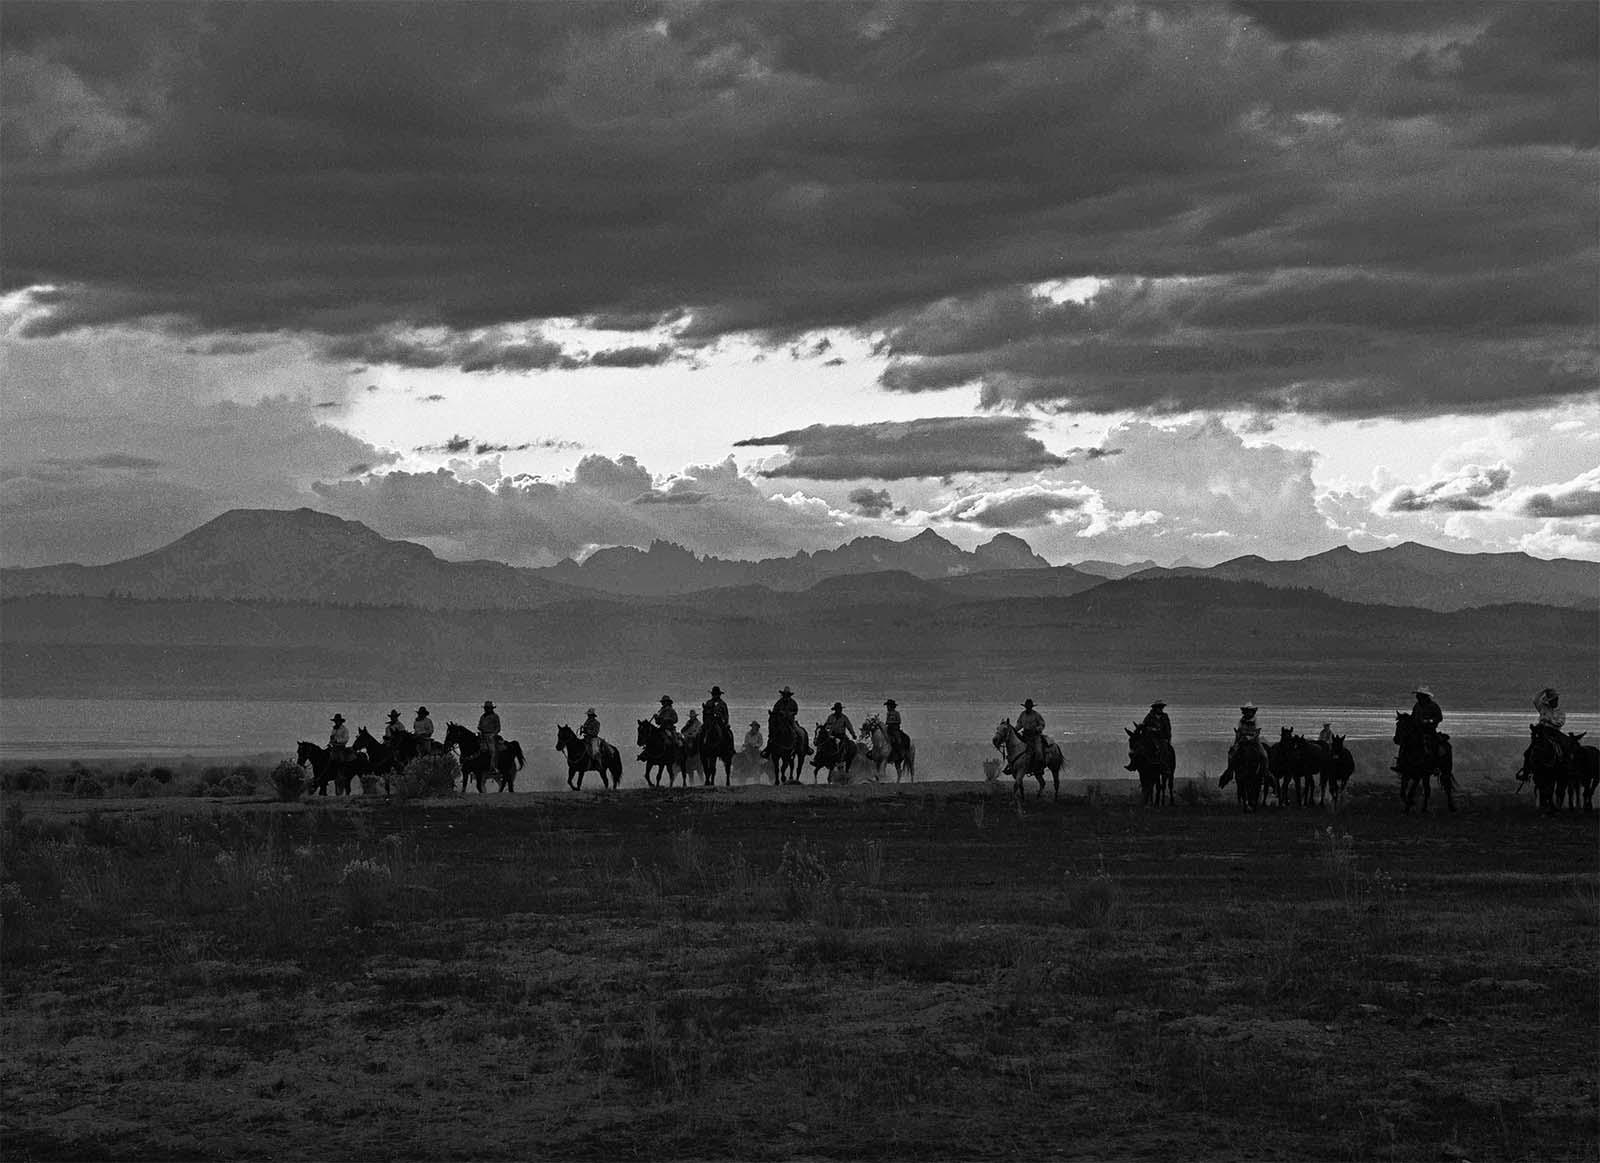 Owens Valley Horse Drive, California 1991. Silver gelatin print by William Shepley. P.602.016